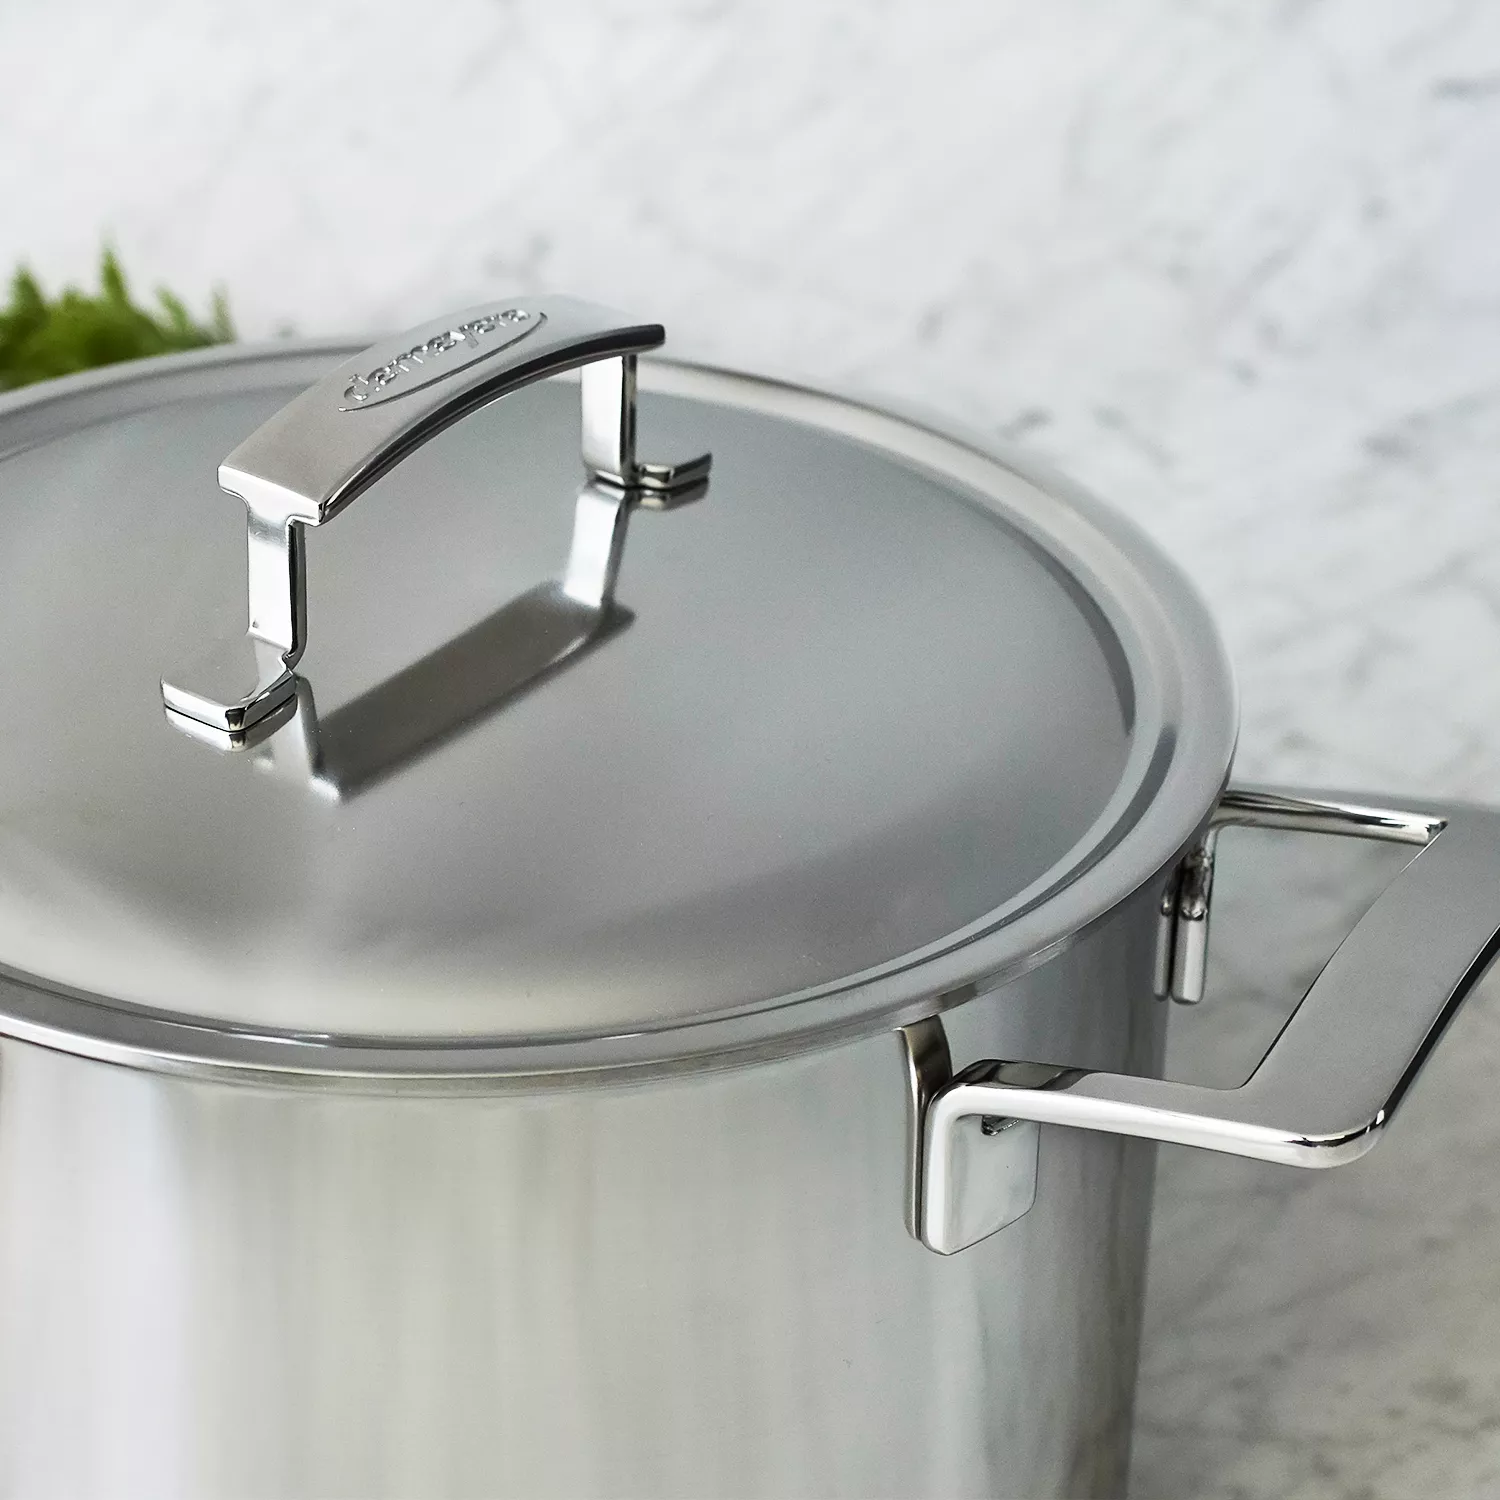 Demeyere Silver7 Stainless Steel Stockpot with Lid, 8 qt., Silver